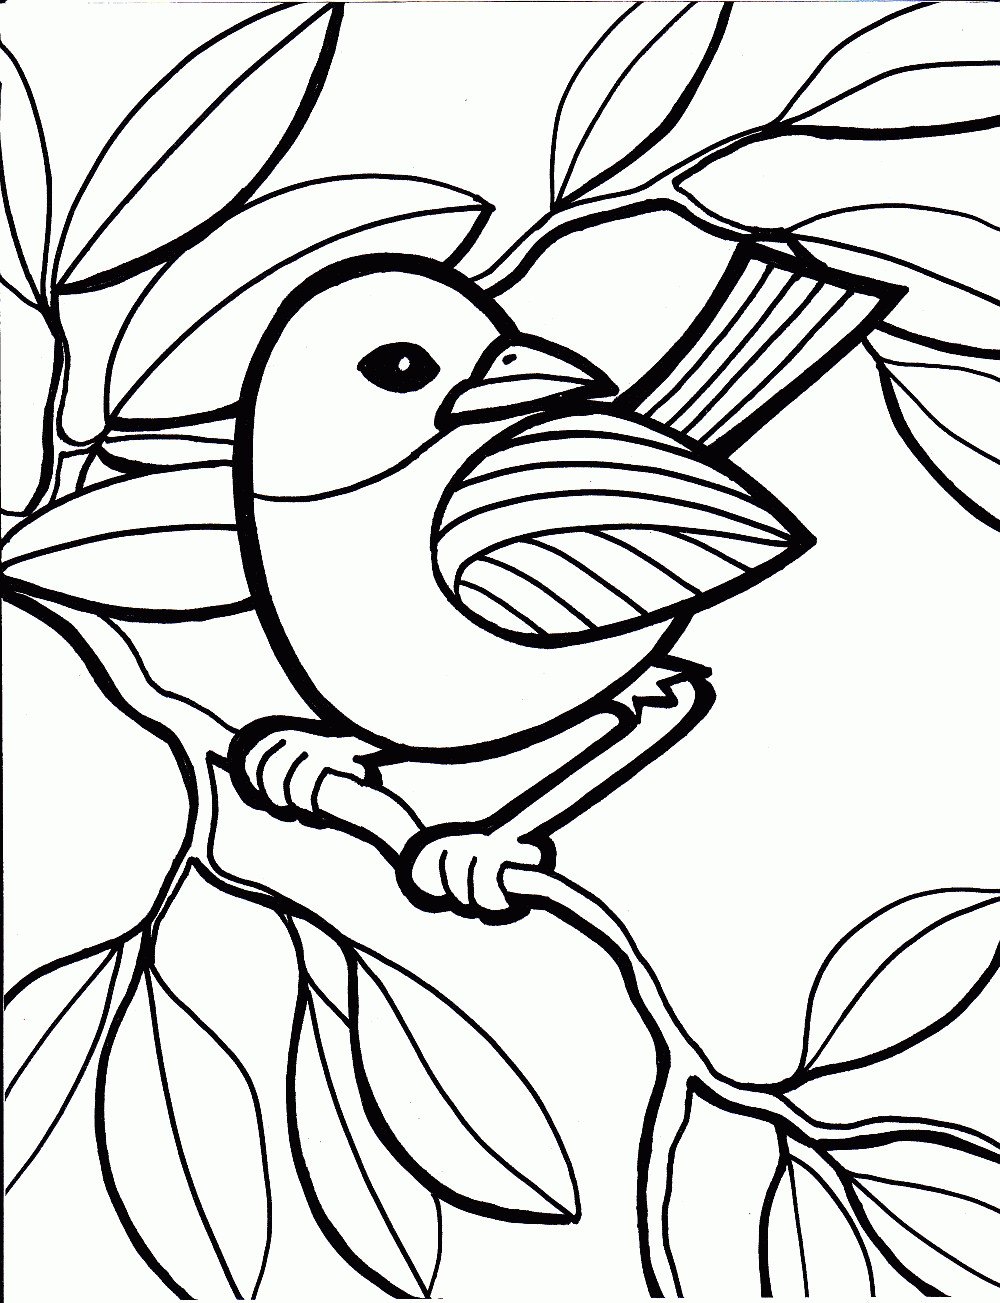 Printable Coloring Pages For Adults
 Printable coloring pages